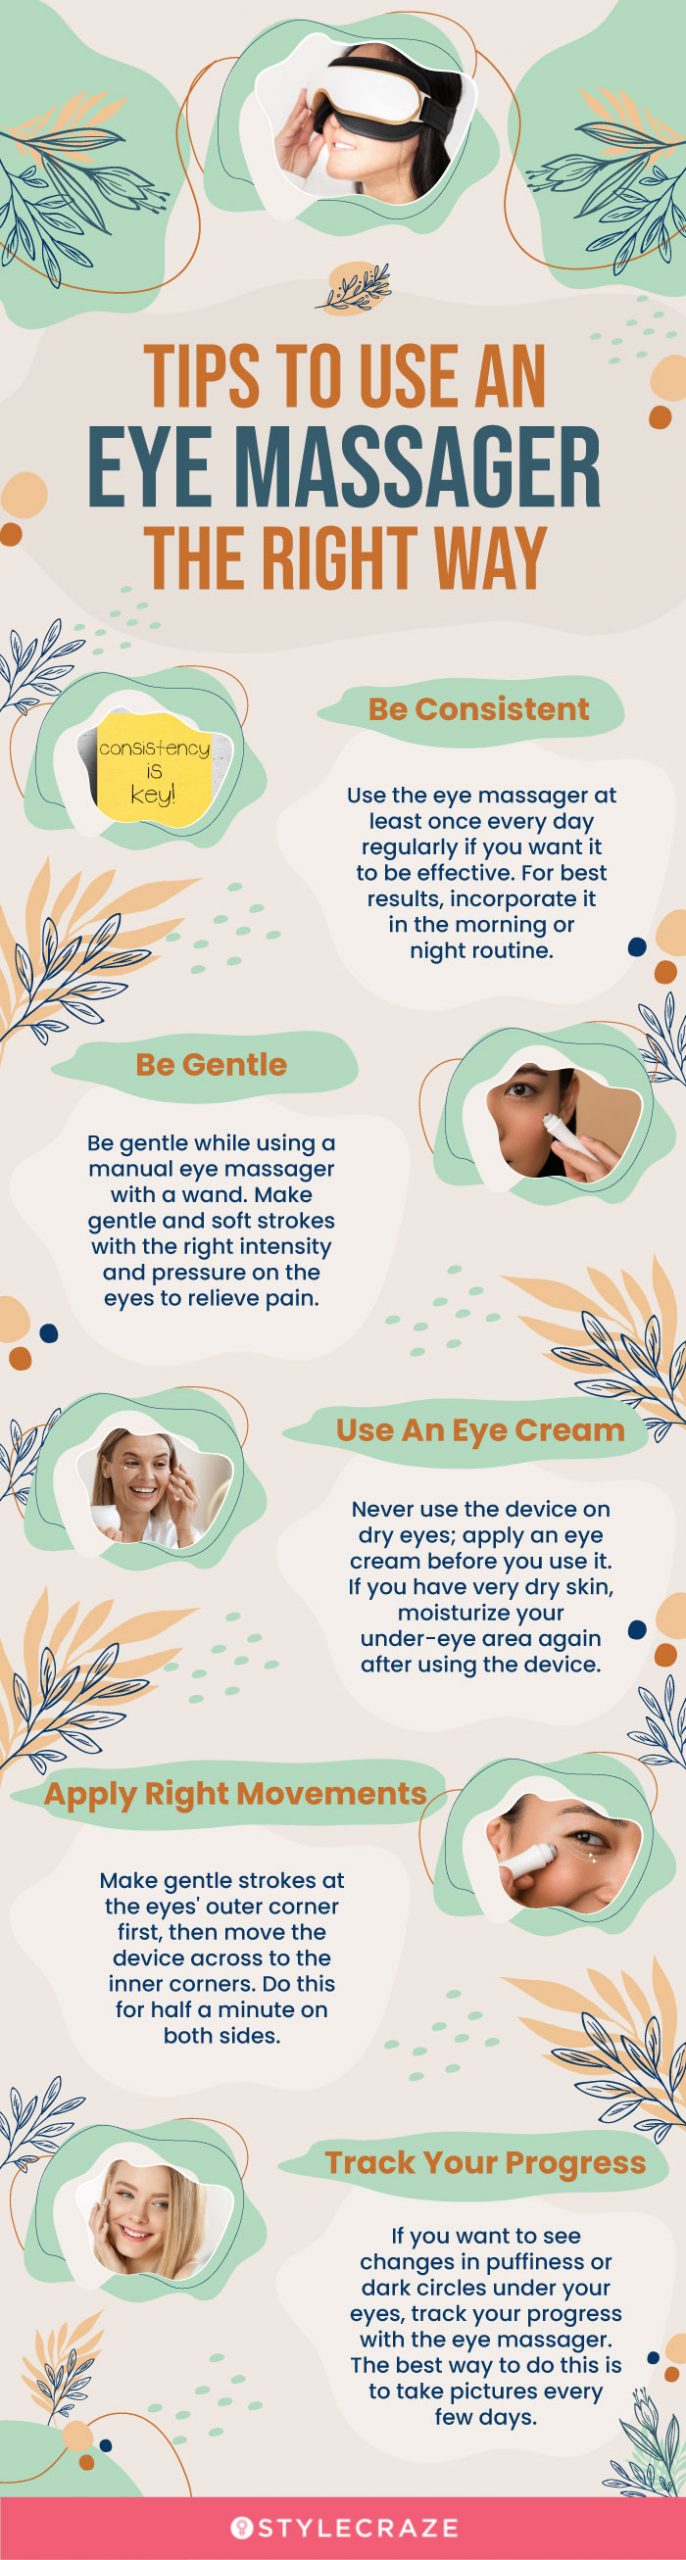 Tips To Use An Eye Massager The Right Way (infographic)